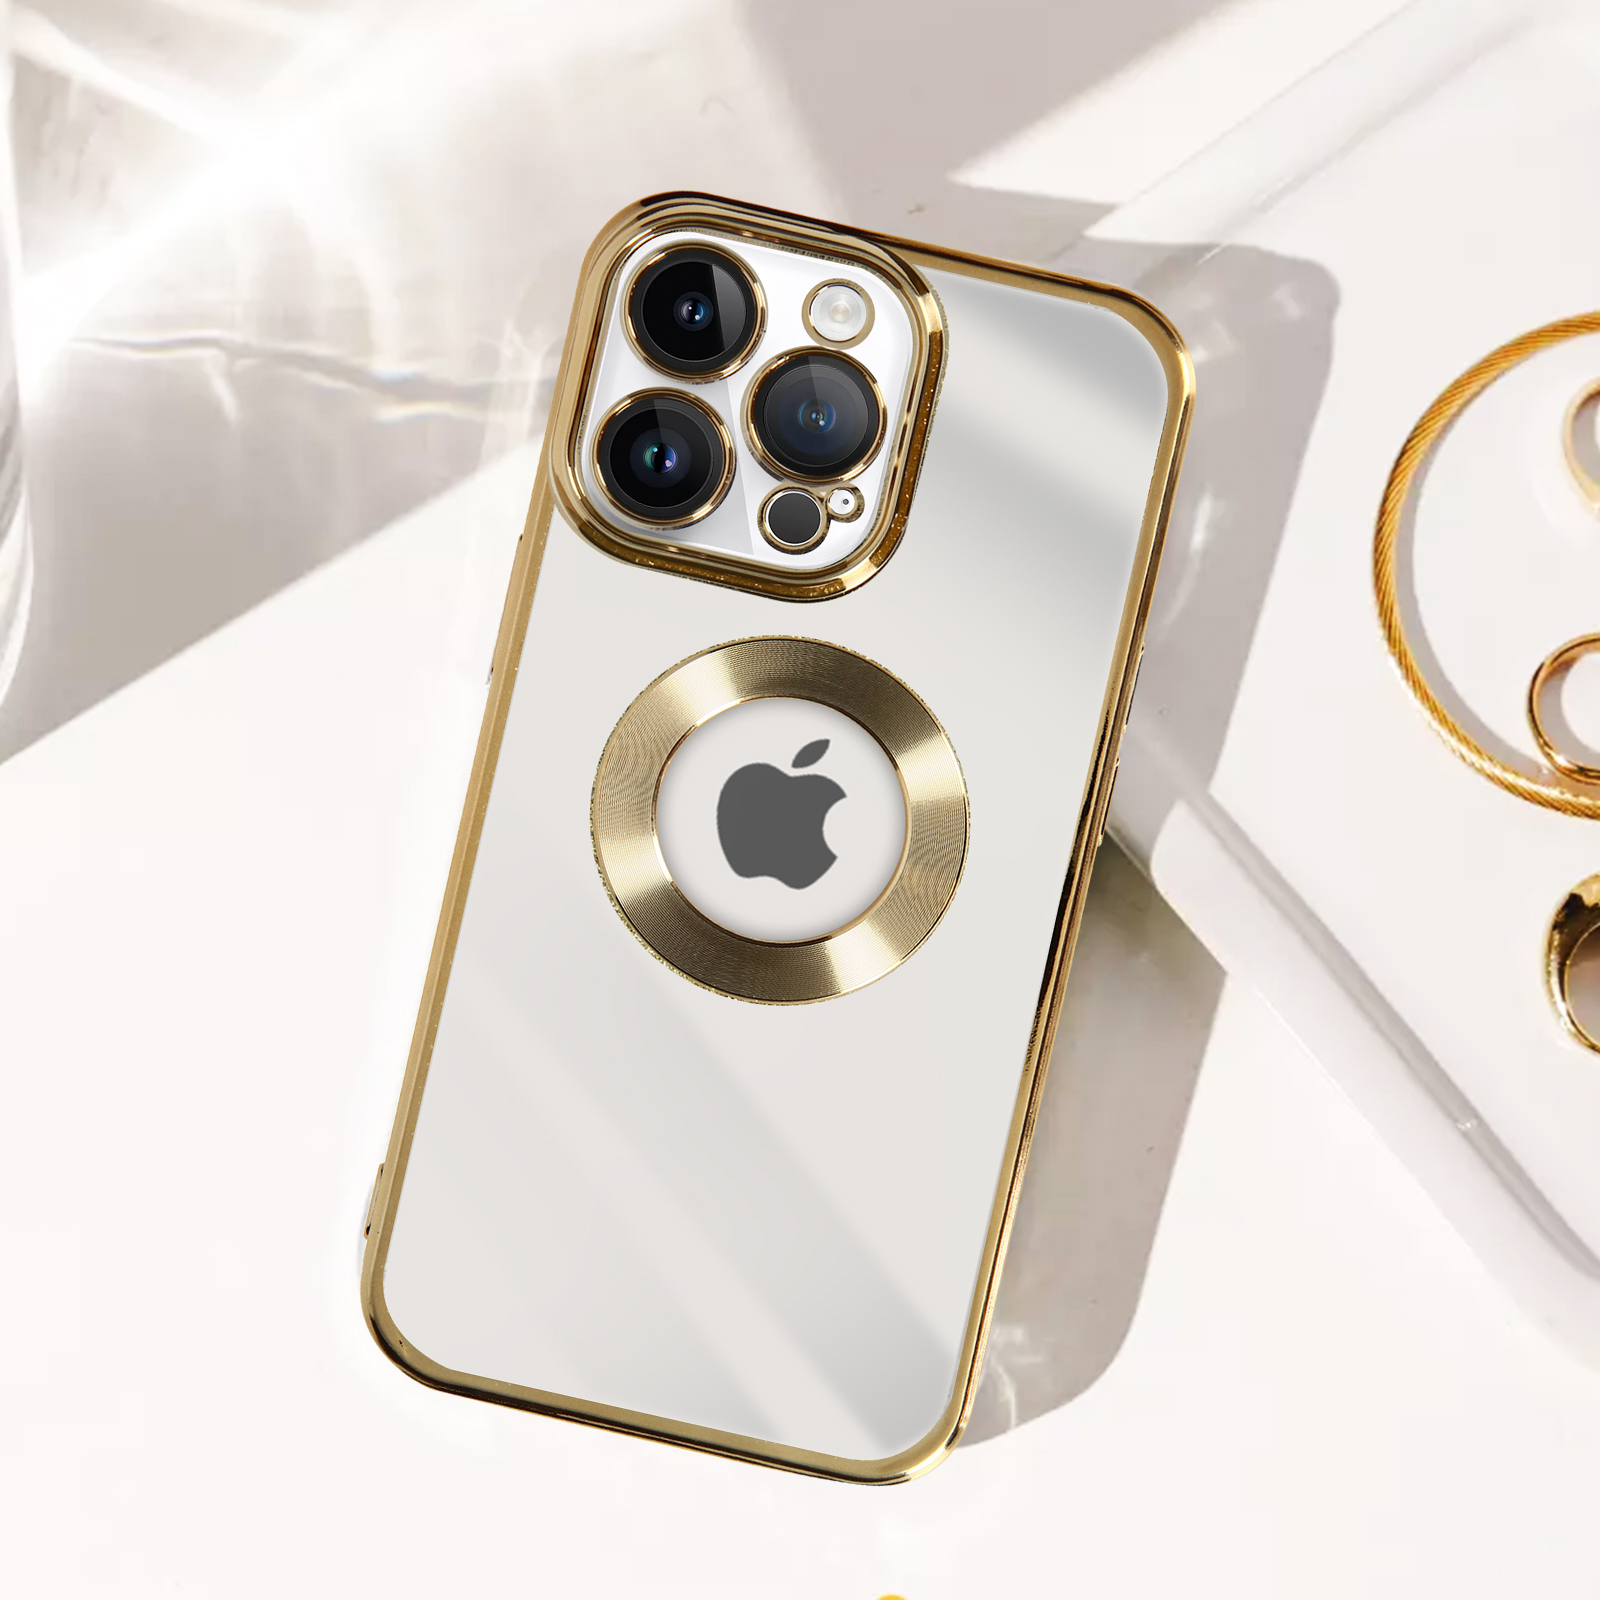 Series, Apple, Protecam Backcover, 14 iPhone AVIZAR Spark Gold Max, Pro